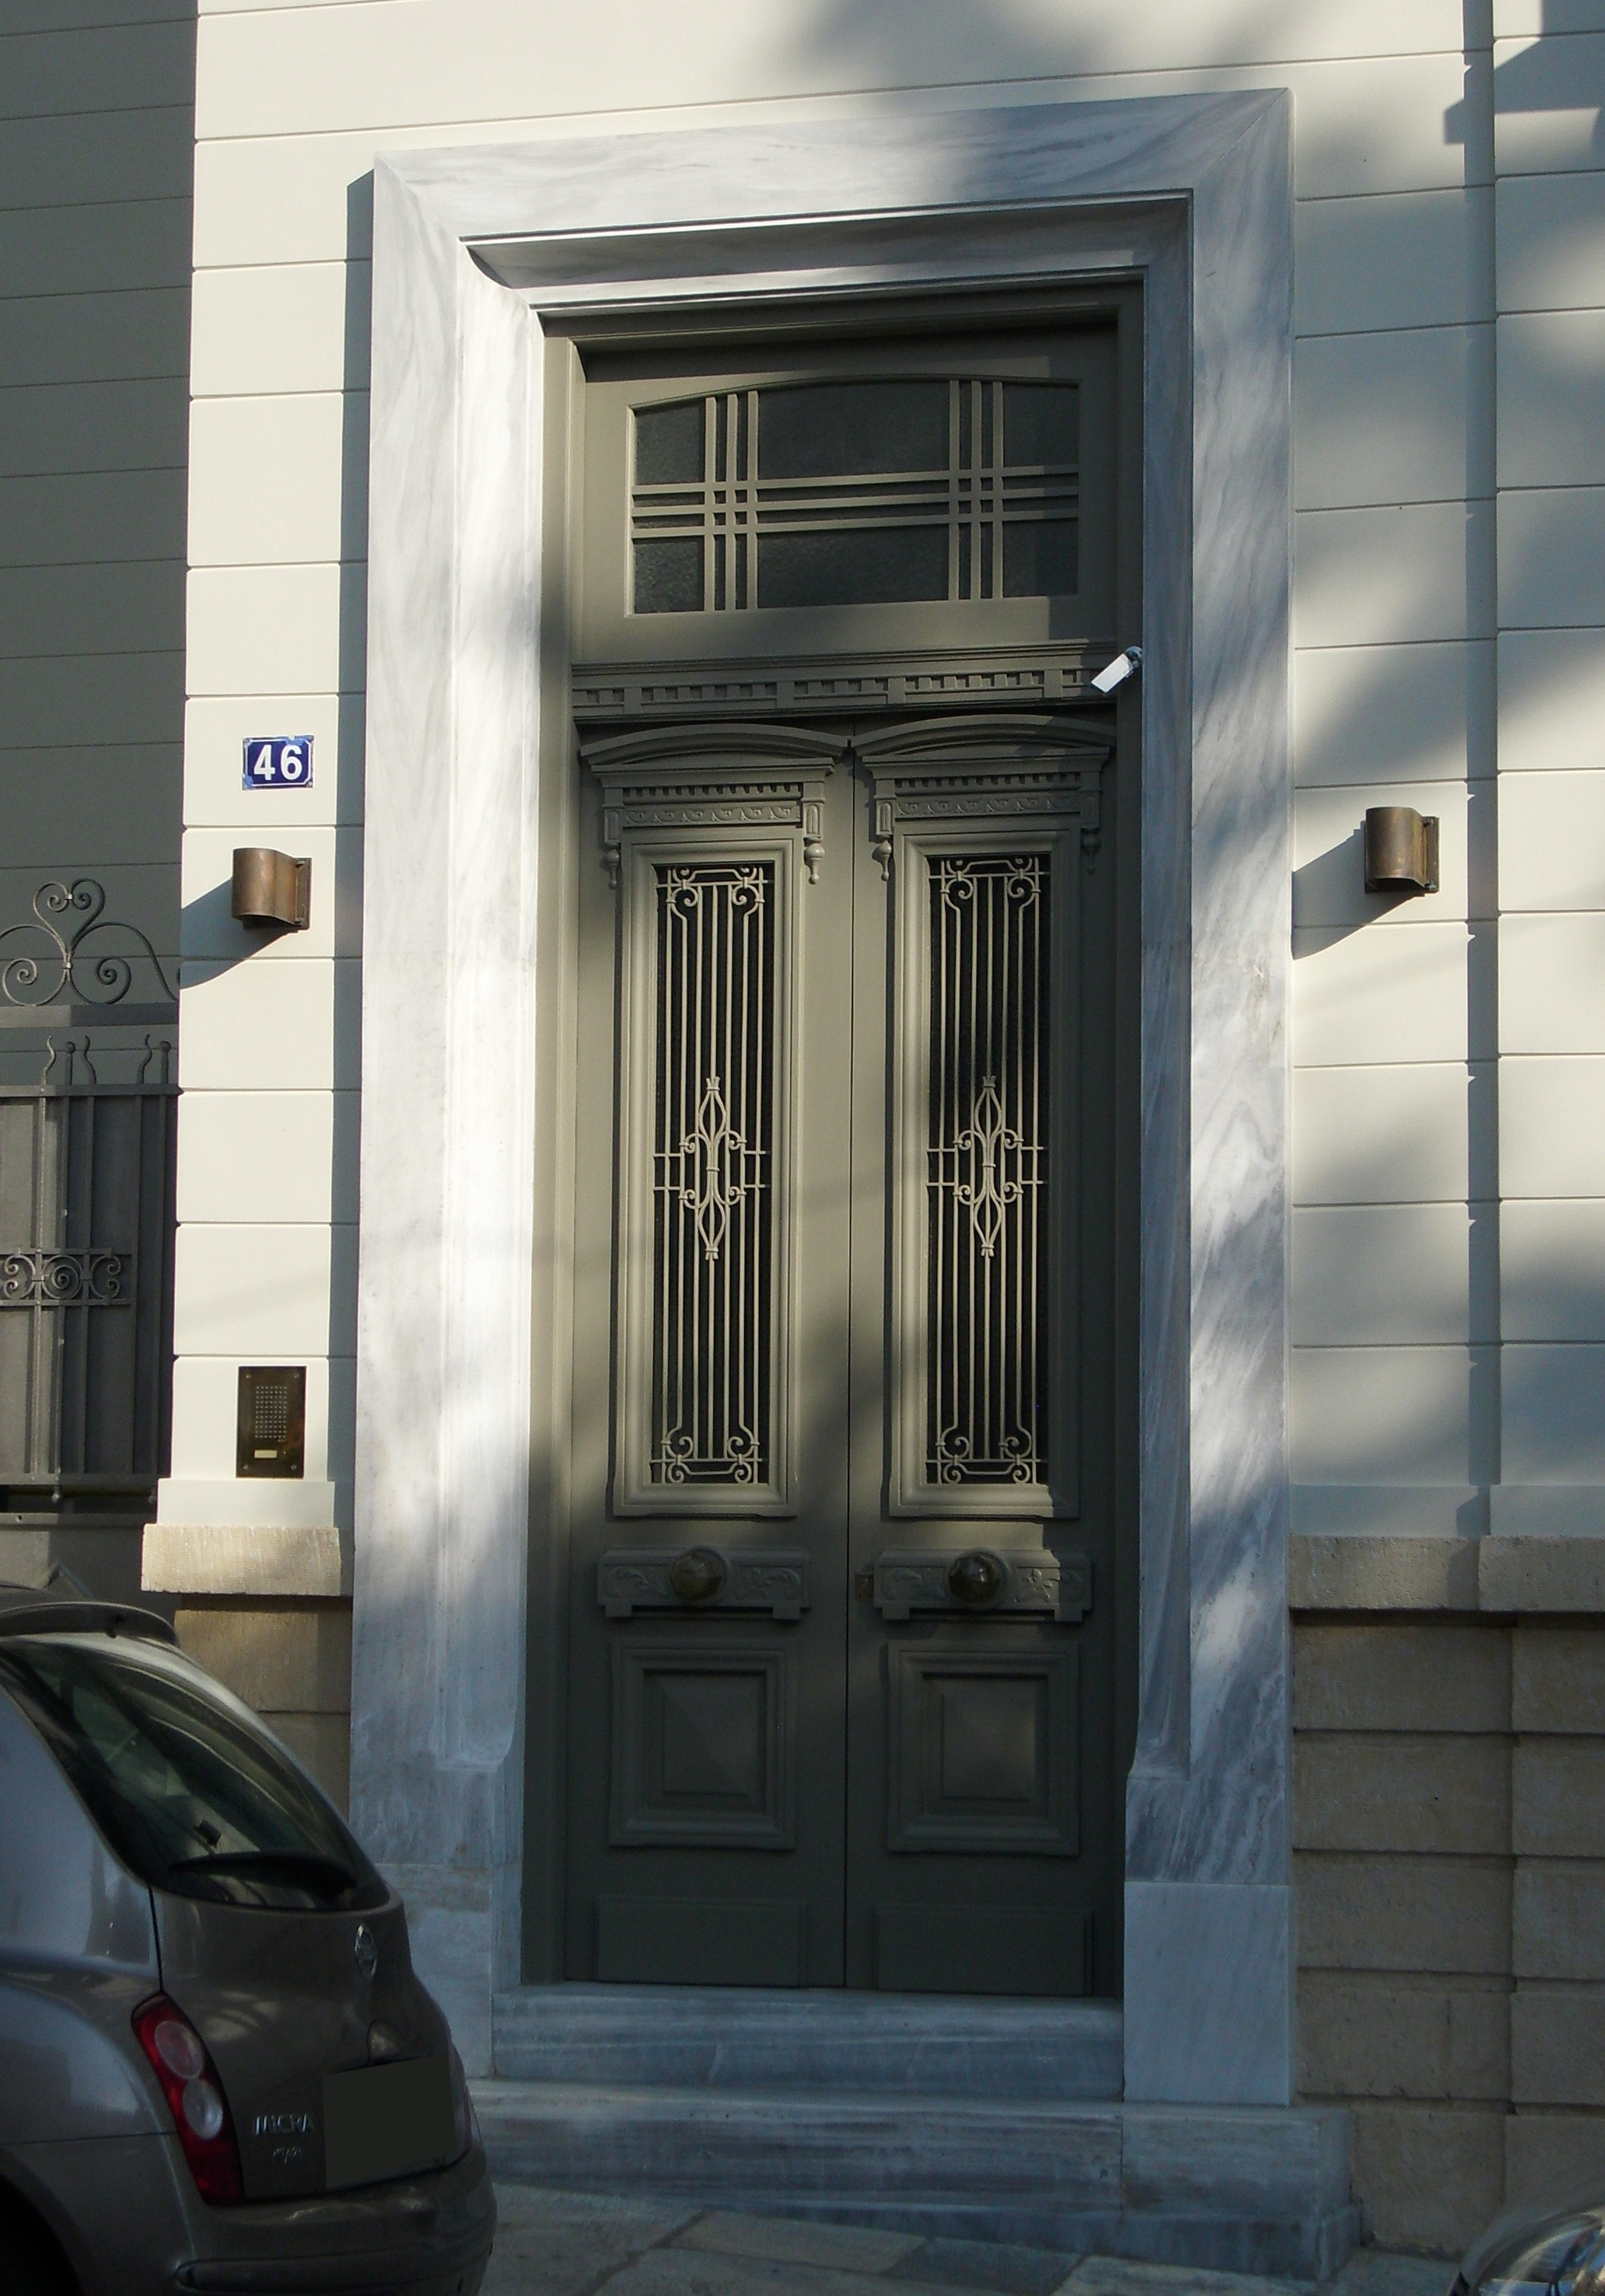 View of the eccentric entrance